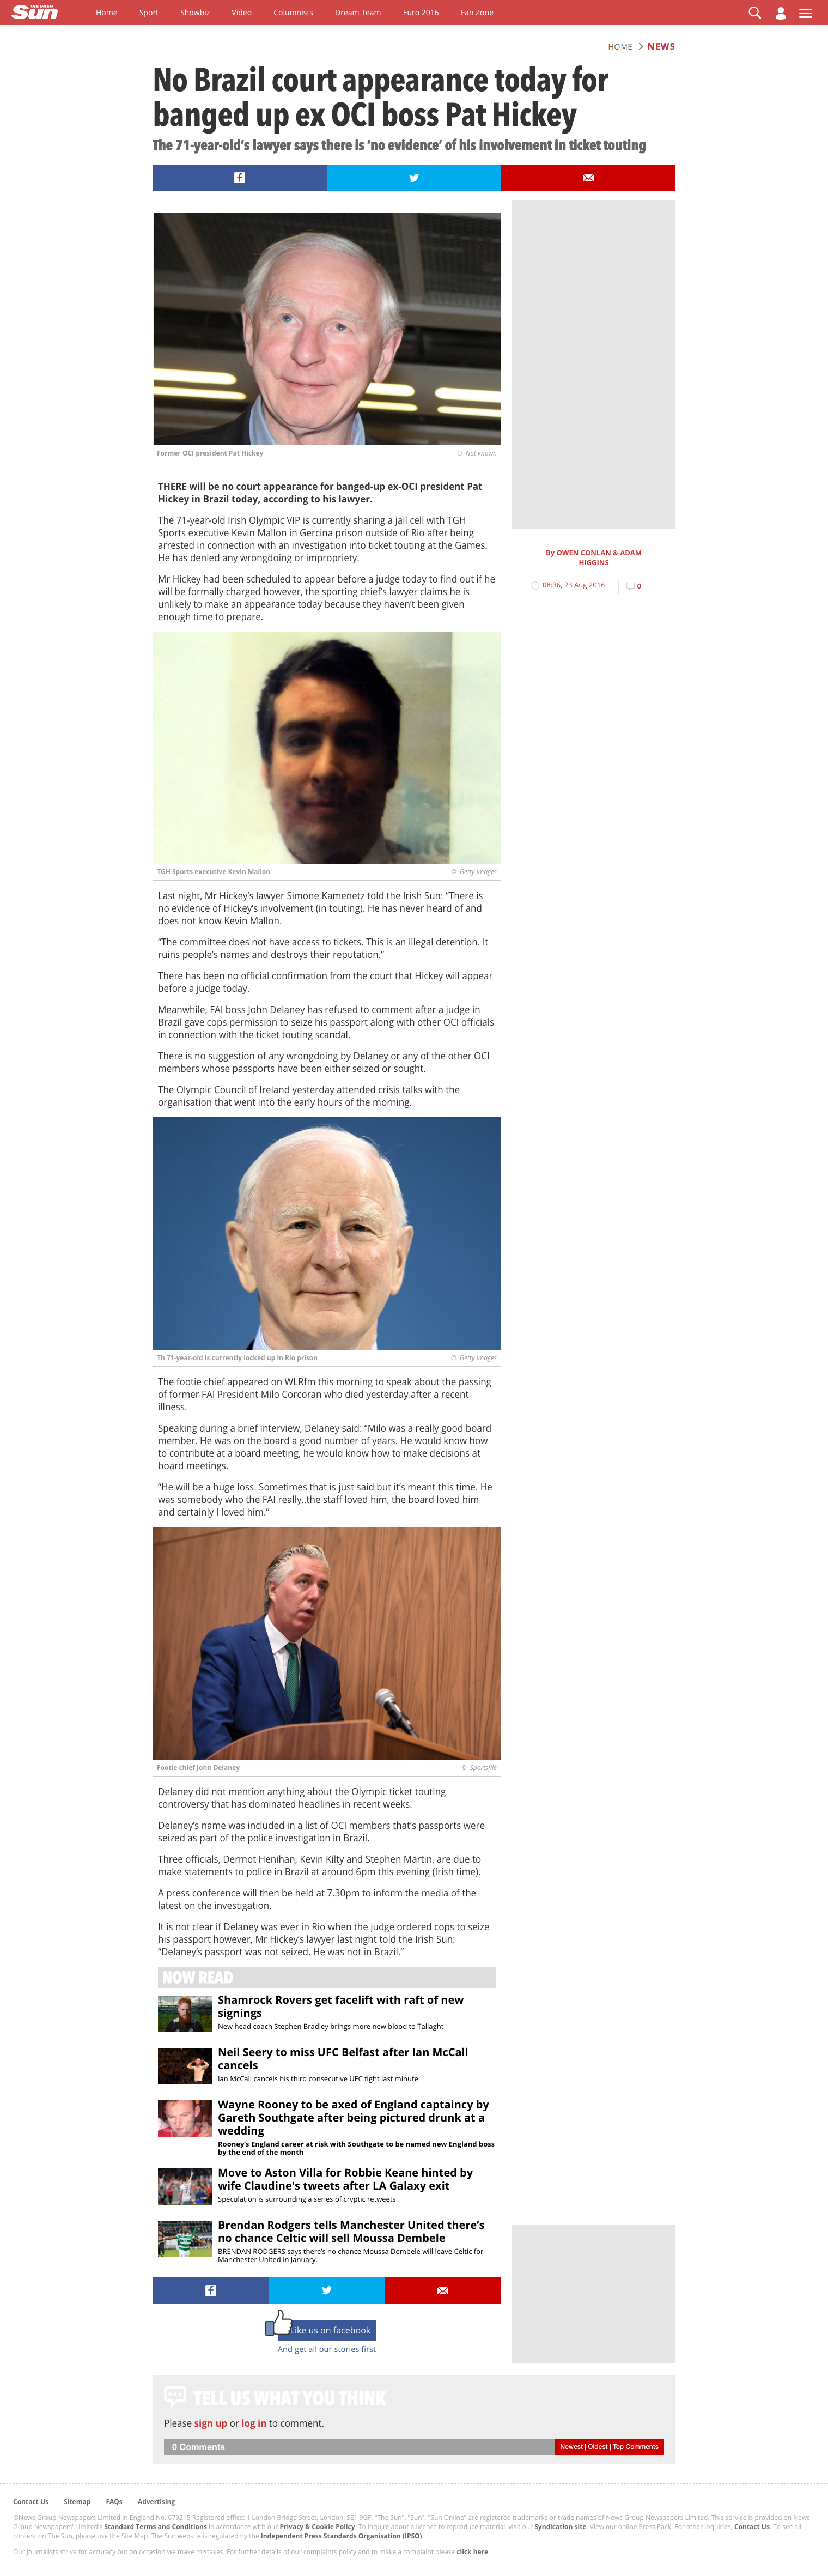 screencapture-thesun-ie-irishsol-homepage-news-7227710-No-Brazil-court-appearance-today-for-banged-up-ex-OCI-boss-Pat-Hickey-html-1479483774698